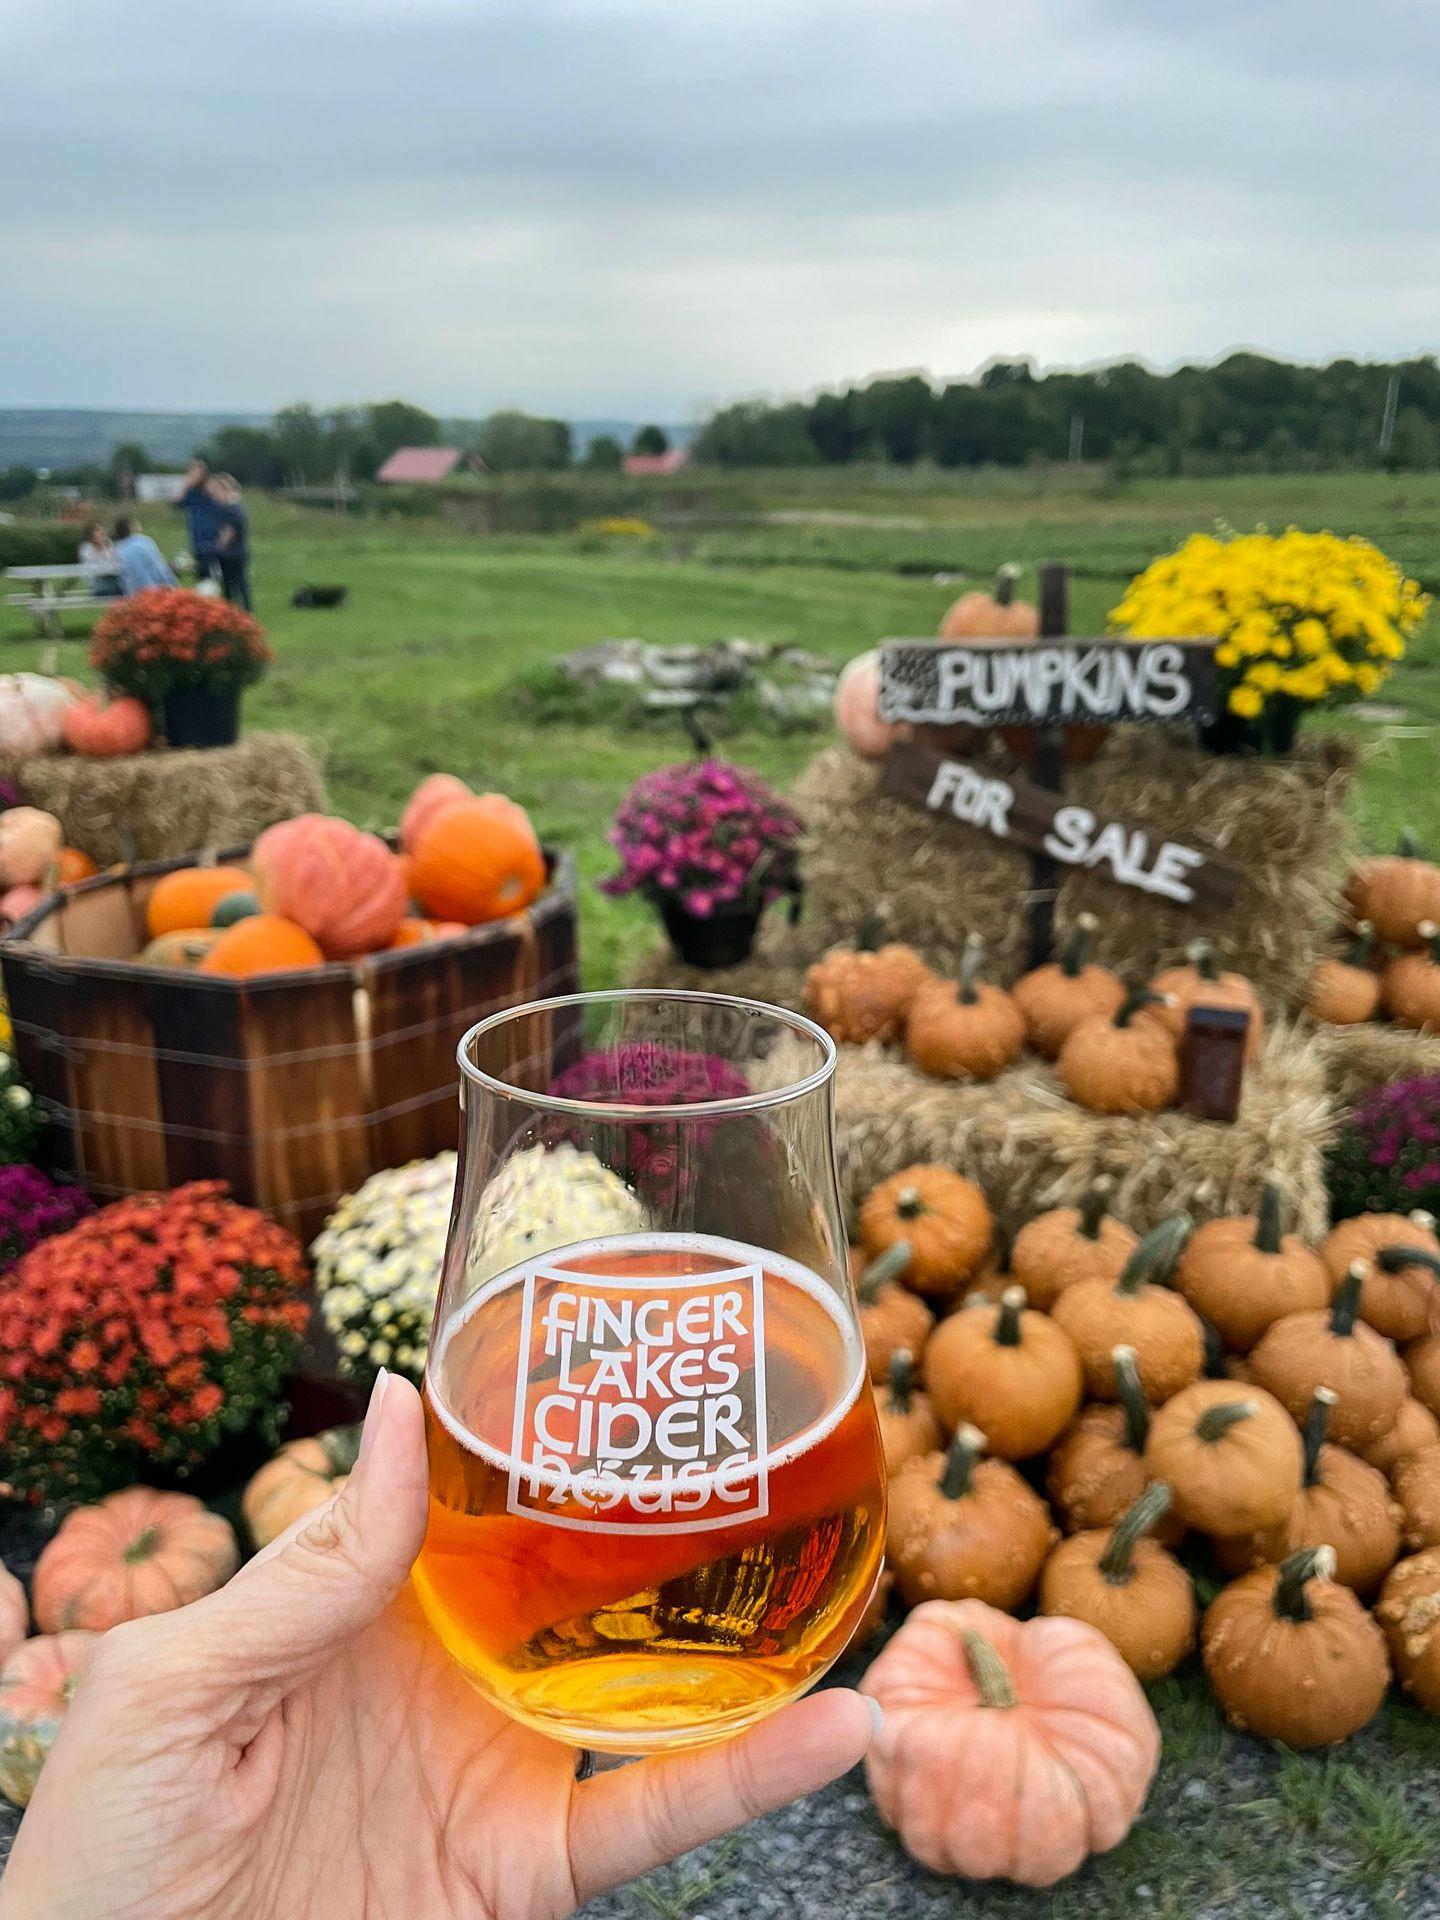 Holding up a glass is cider in front of a display with pumpkins and flowers.